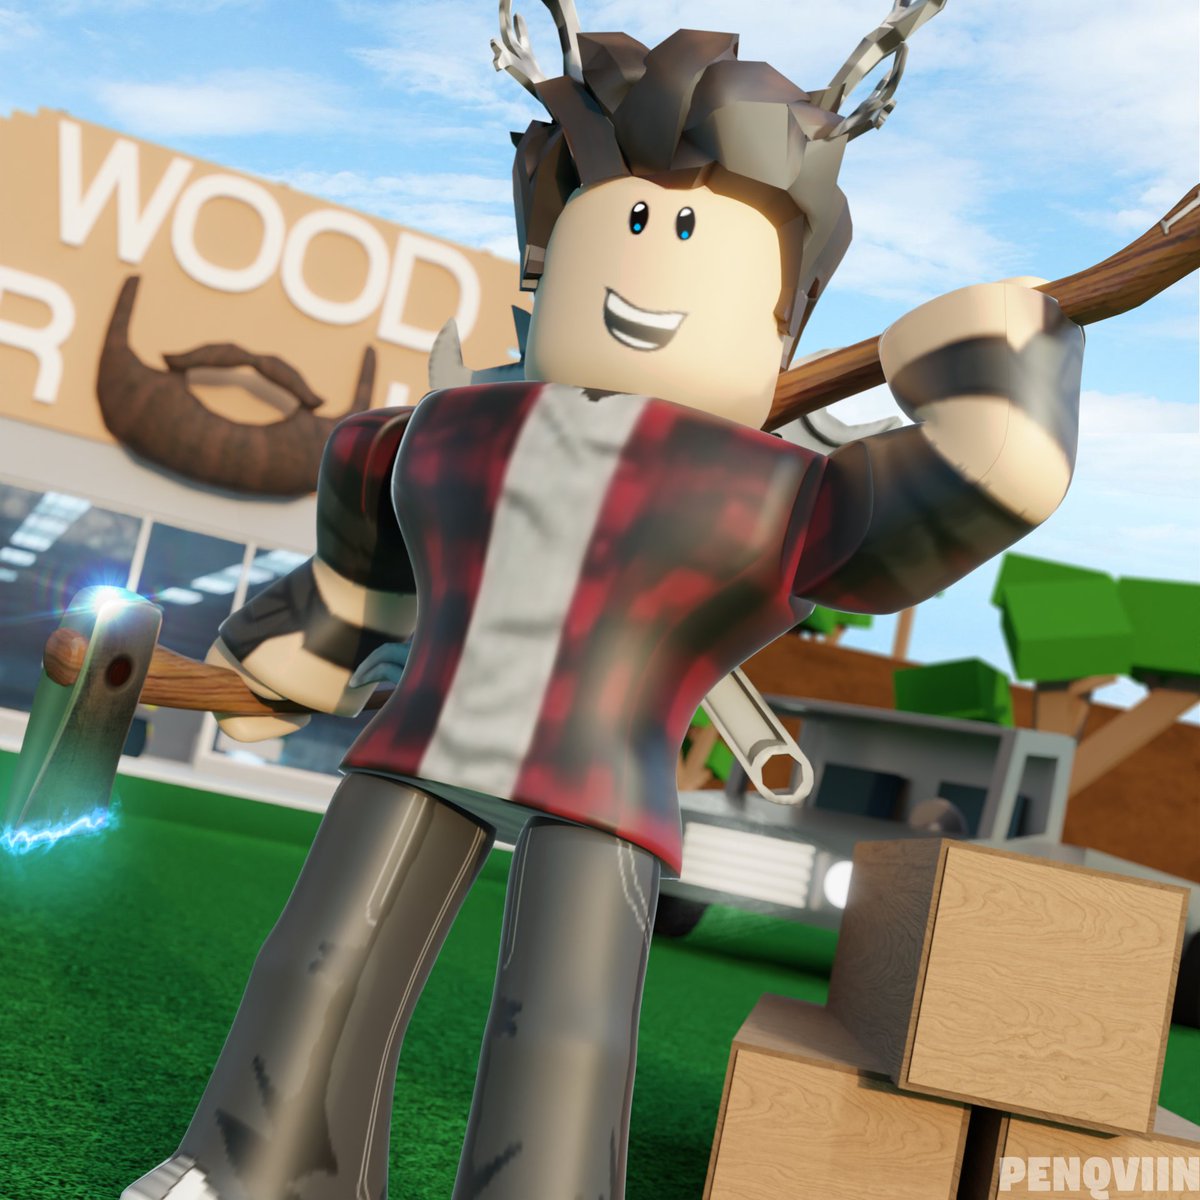 Raekaro On Twitter Omg Yes This Game Is So Much Fun Thats The Reason I Even Downloaded Roblox I Love Lumber Tycoon 2 - roblox games lumber tycoon